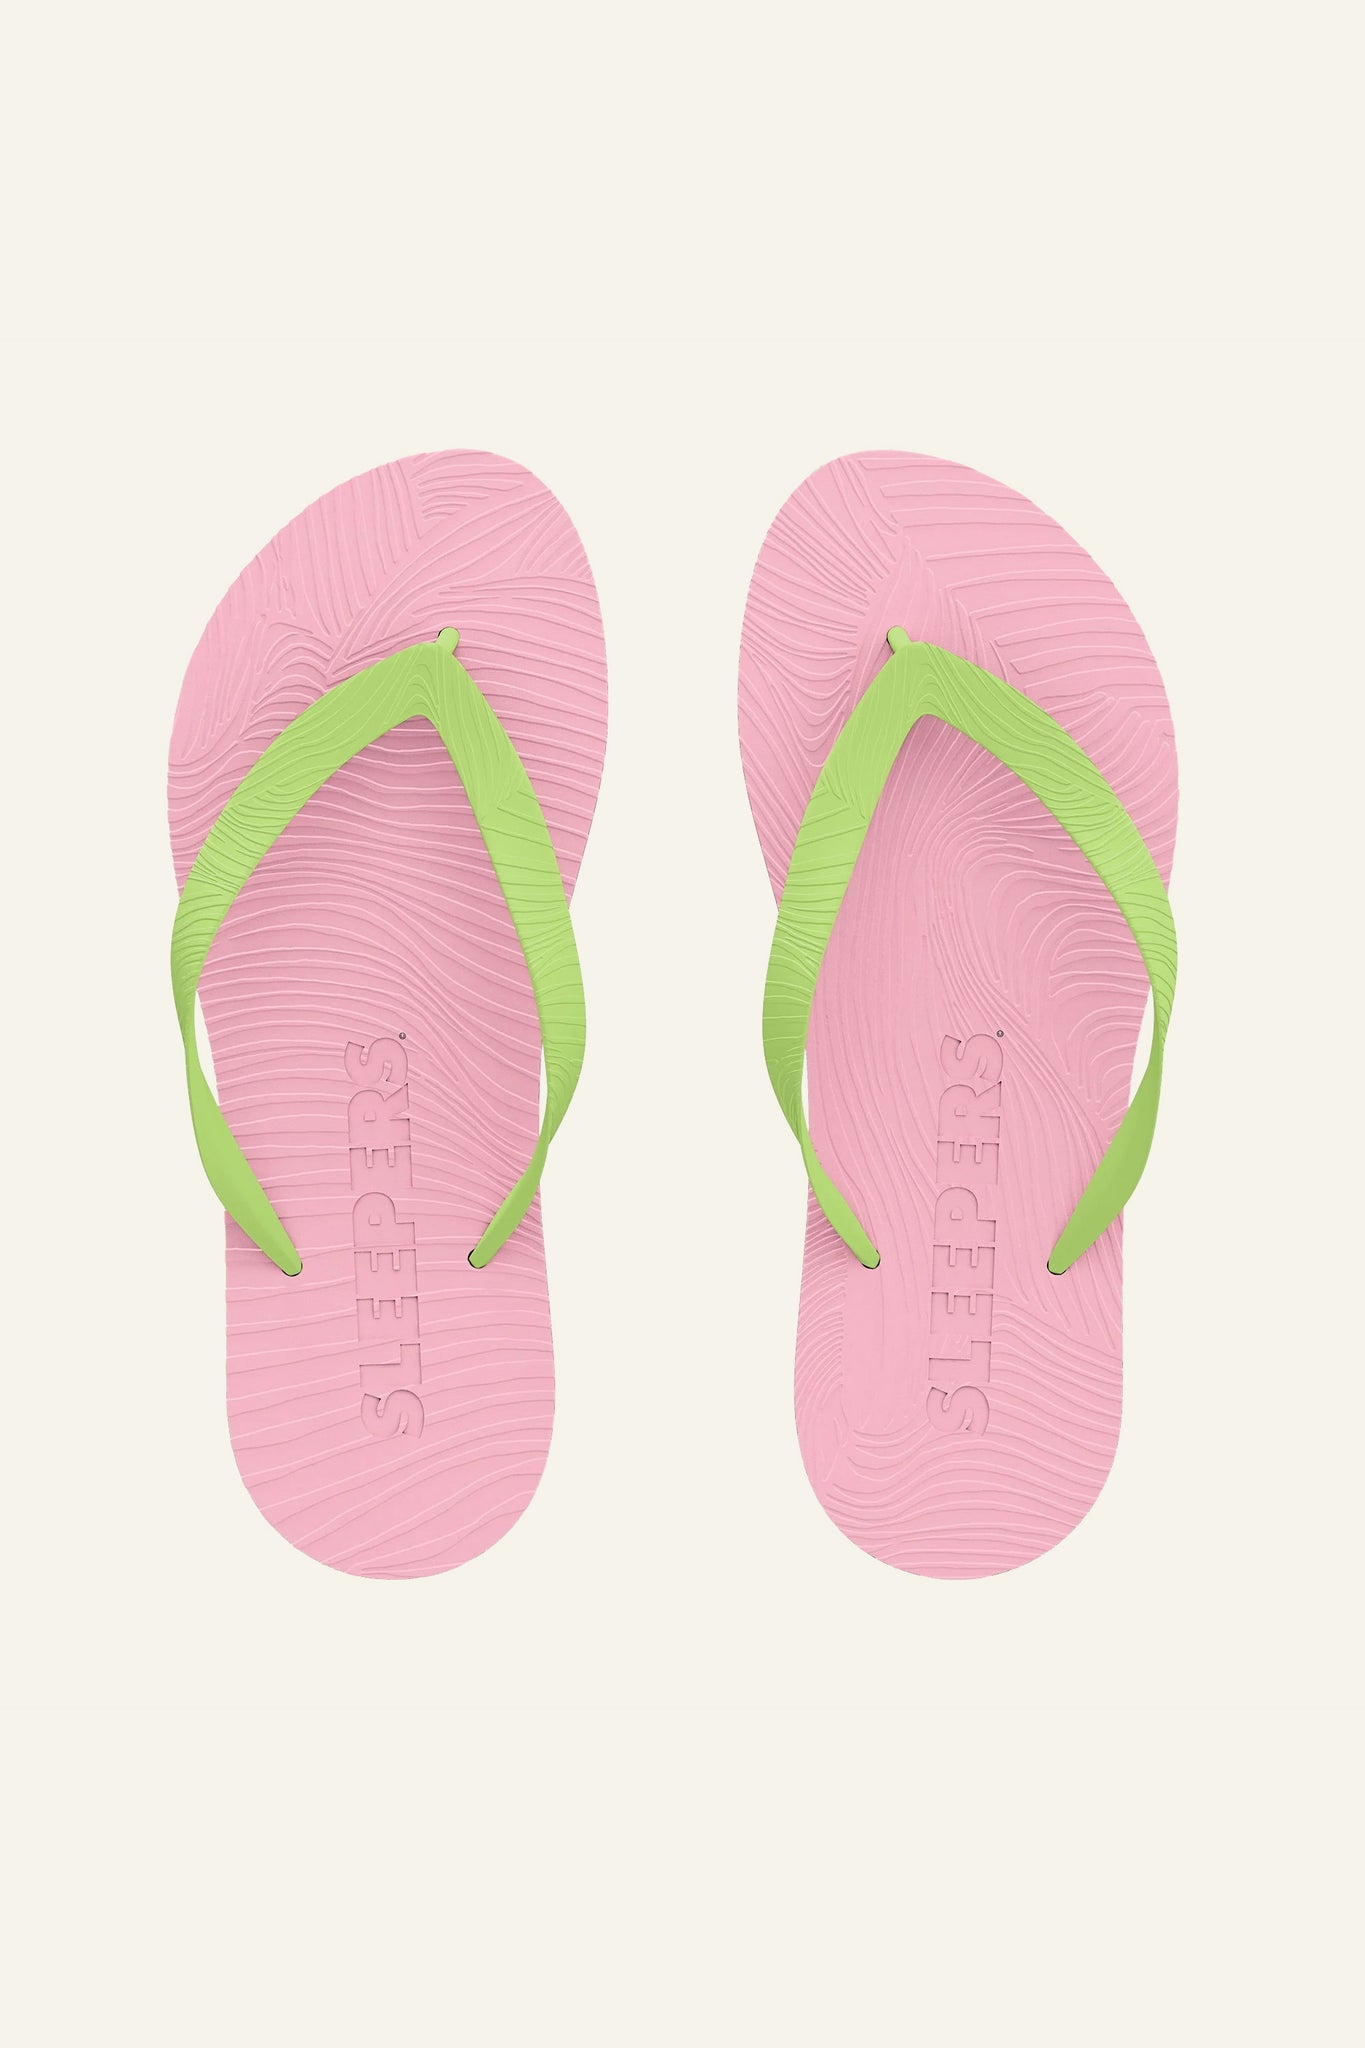 Sleepers Eco-Friendly Sandal Wide-Strap Pink Green